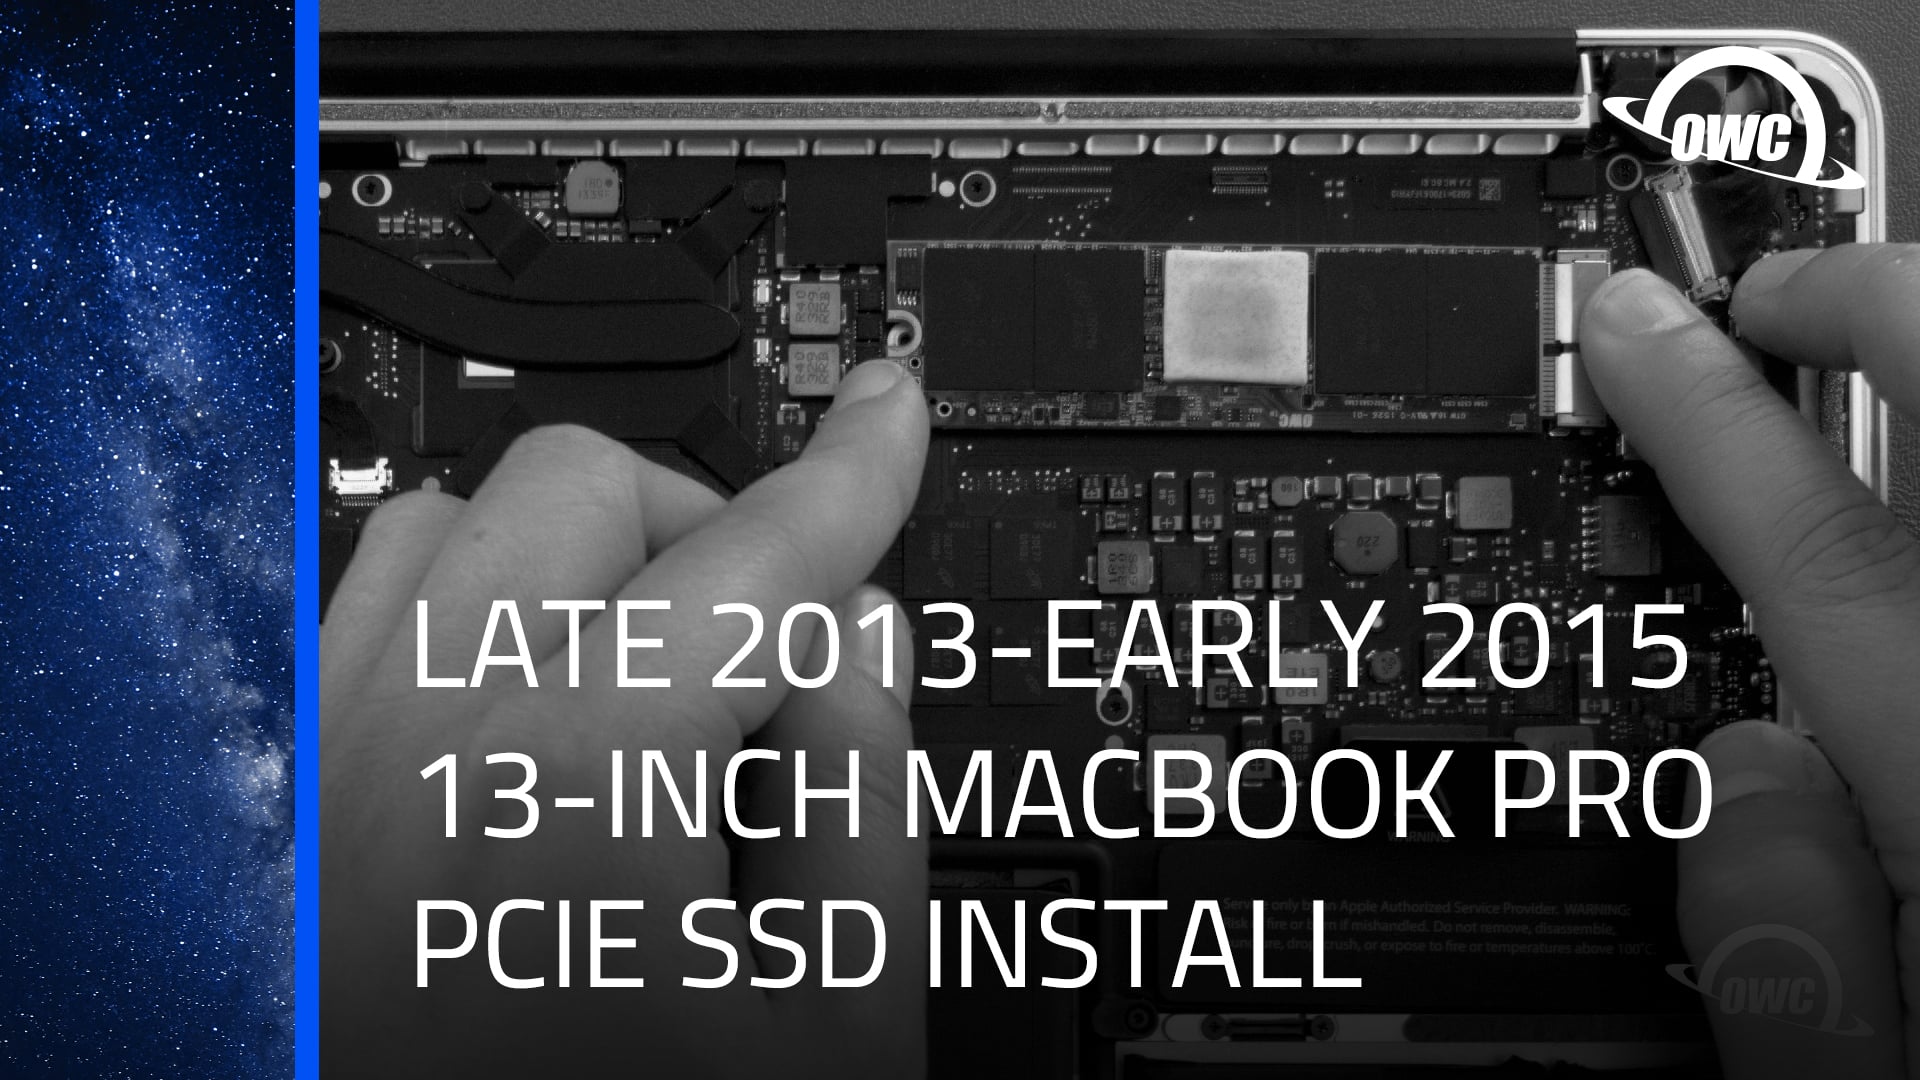 lobby Wade blur How to Upgrade the SSD in a 13-inch MacBook Pro w/ Retina display (Late  2013 - Early 2015) on Vimeo